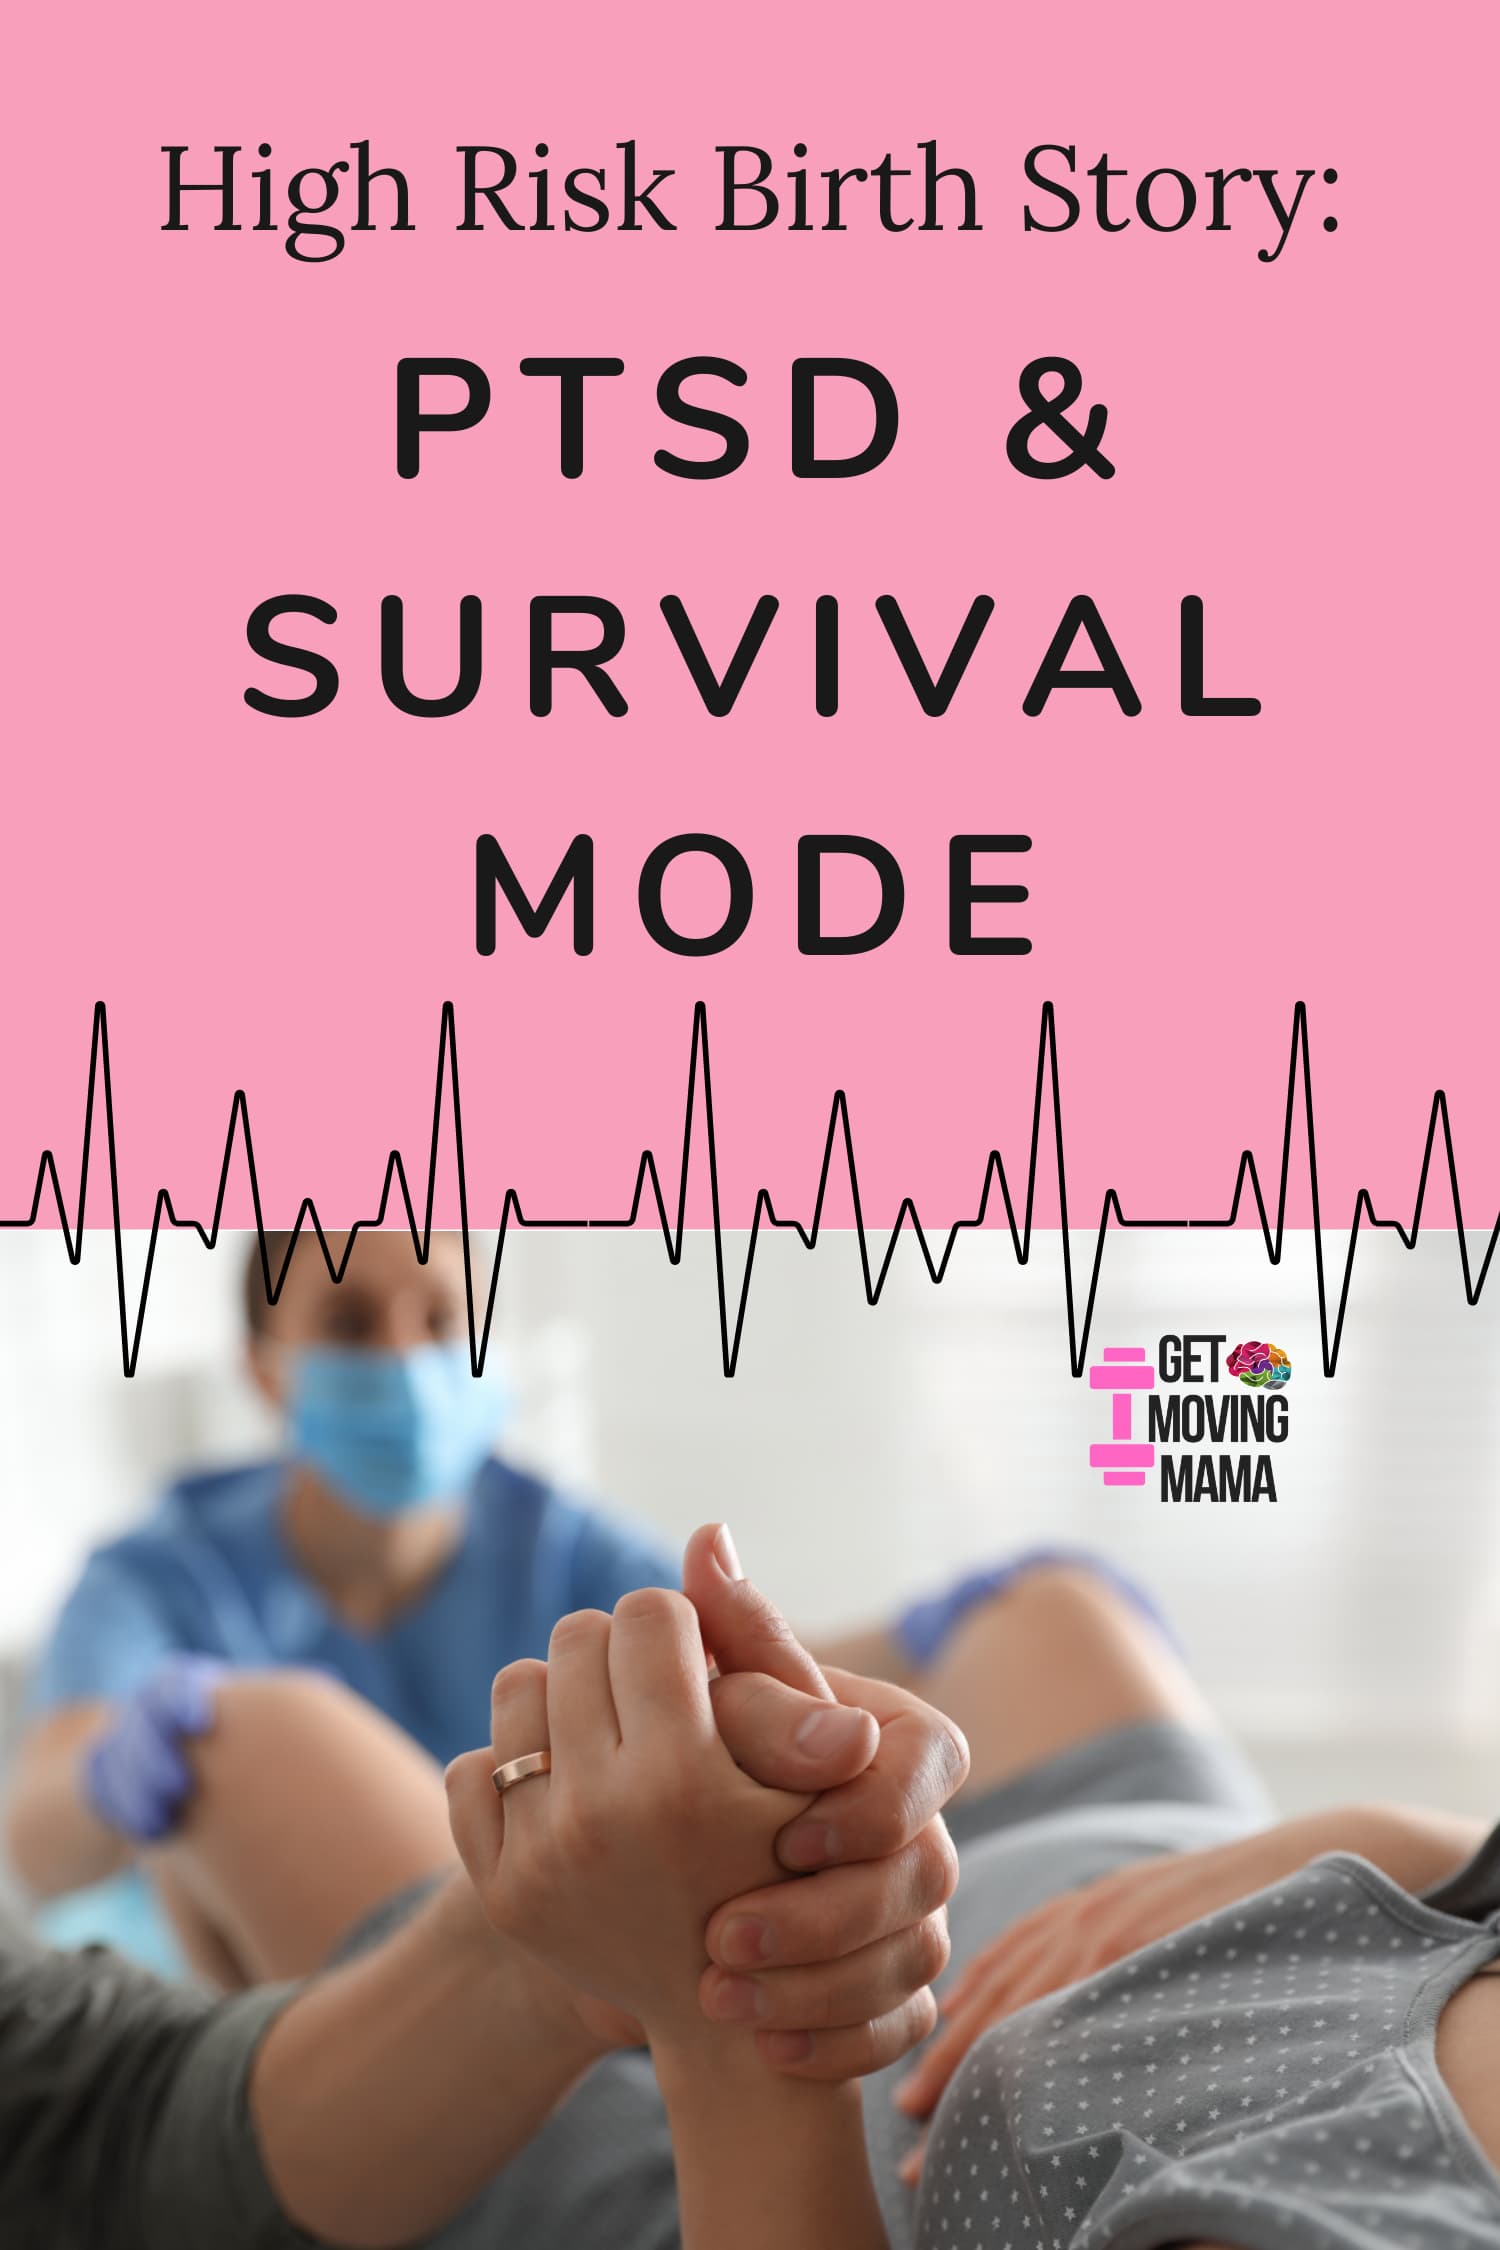 A picture with a pink background and an image of hands being held before a baby is delivered. Black Text reads " High Risk Birth Story: PTSD & Survival Mode".